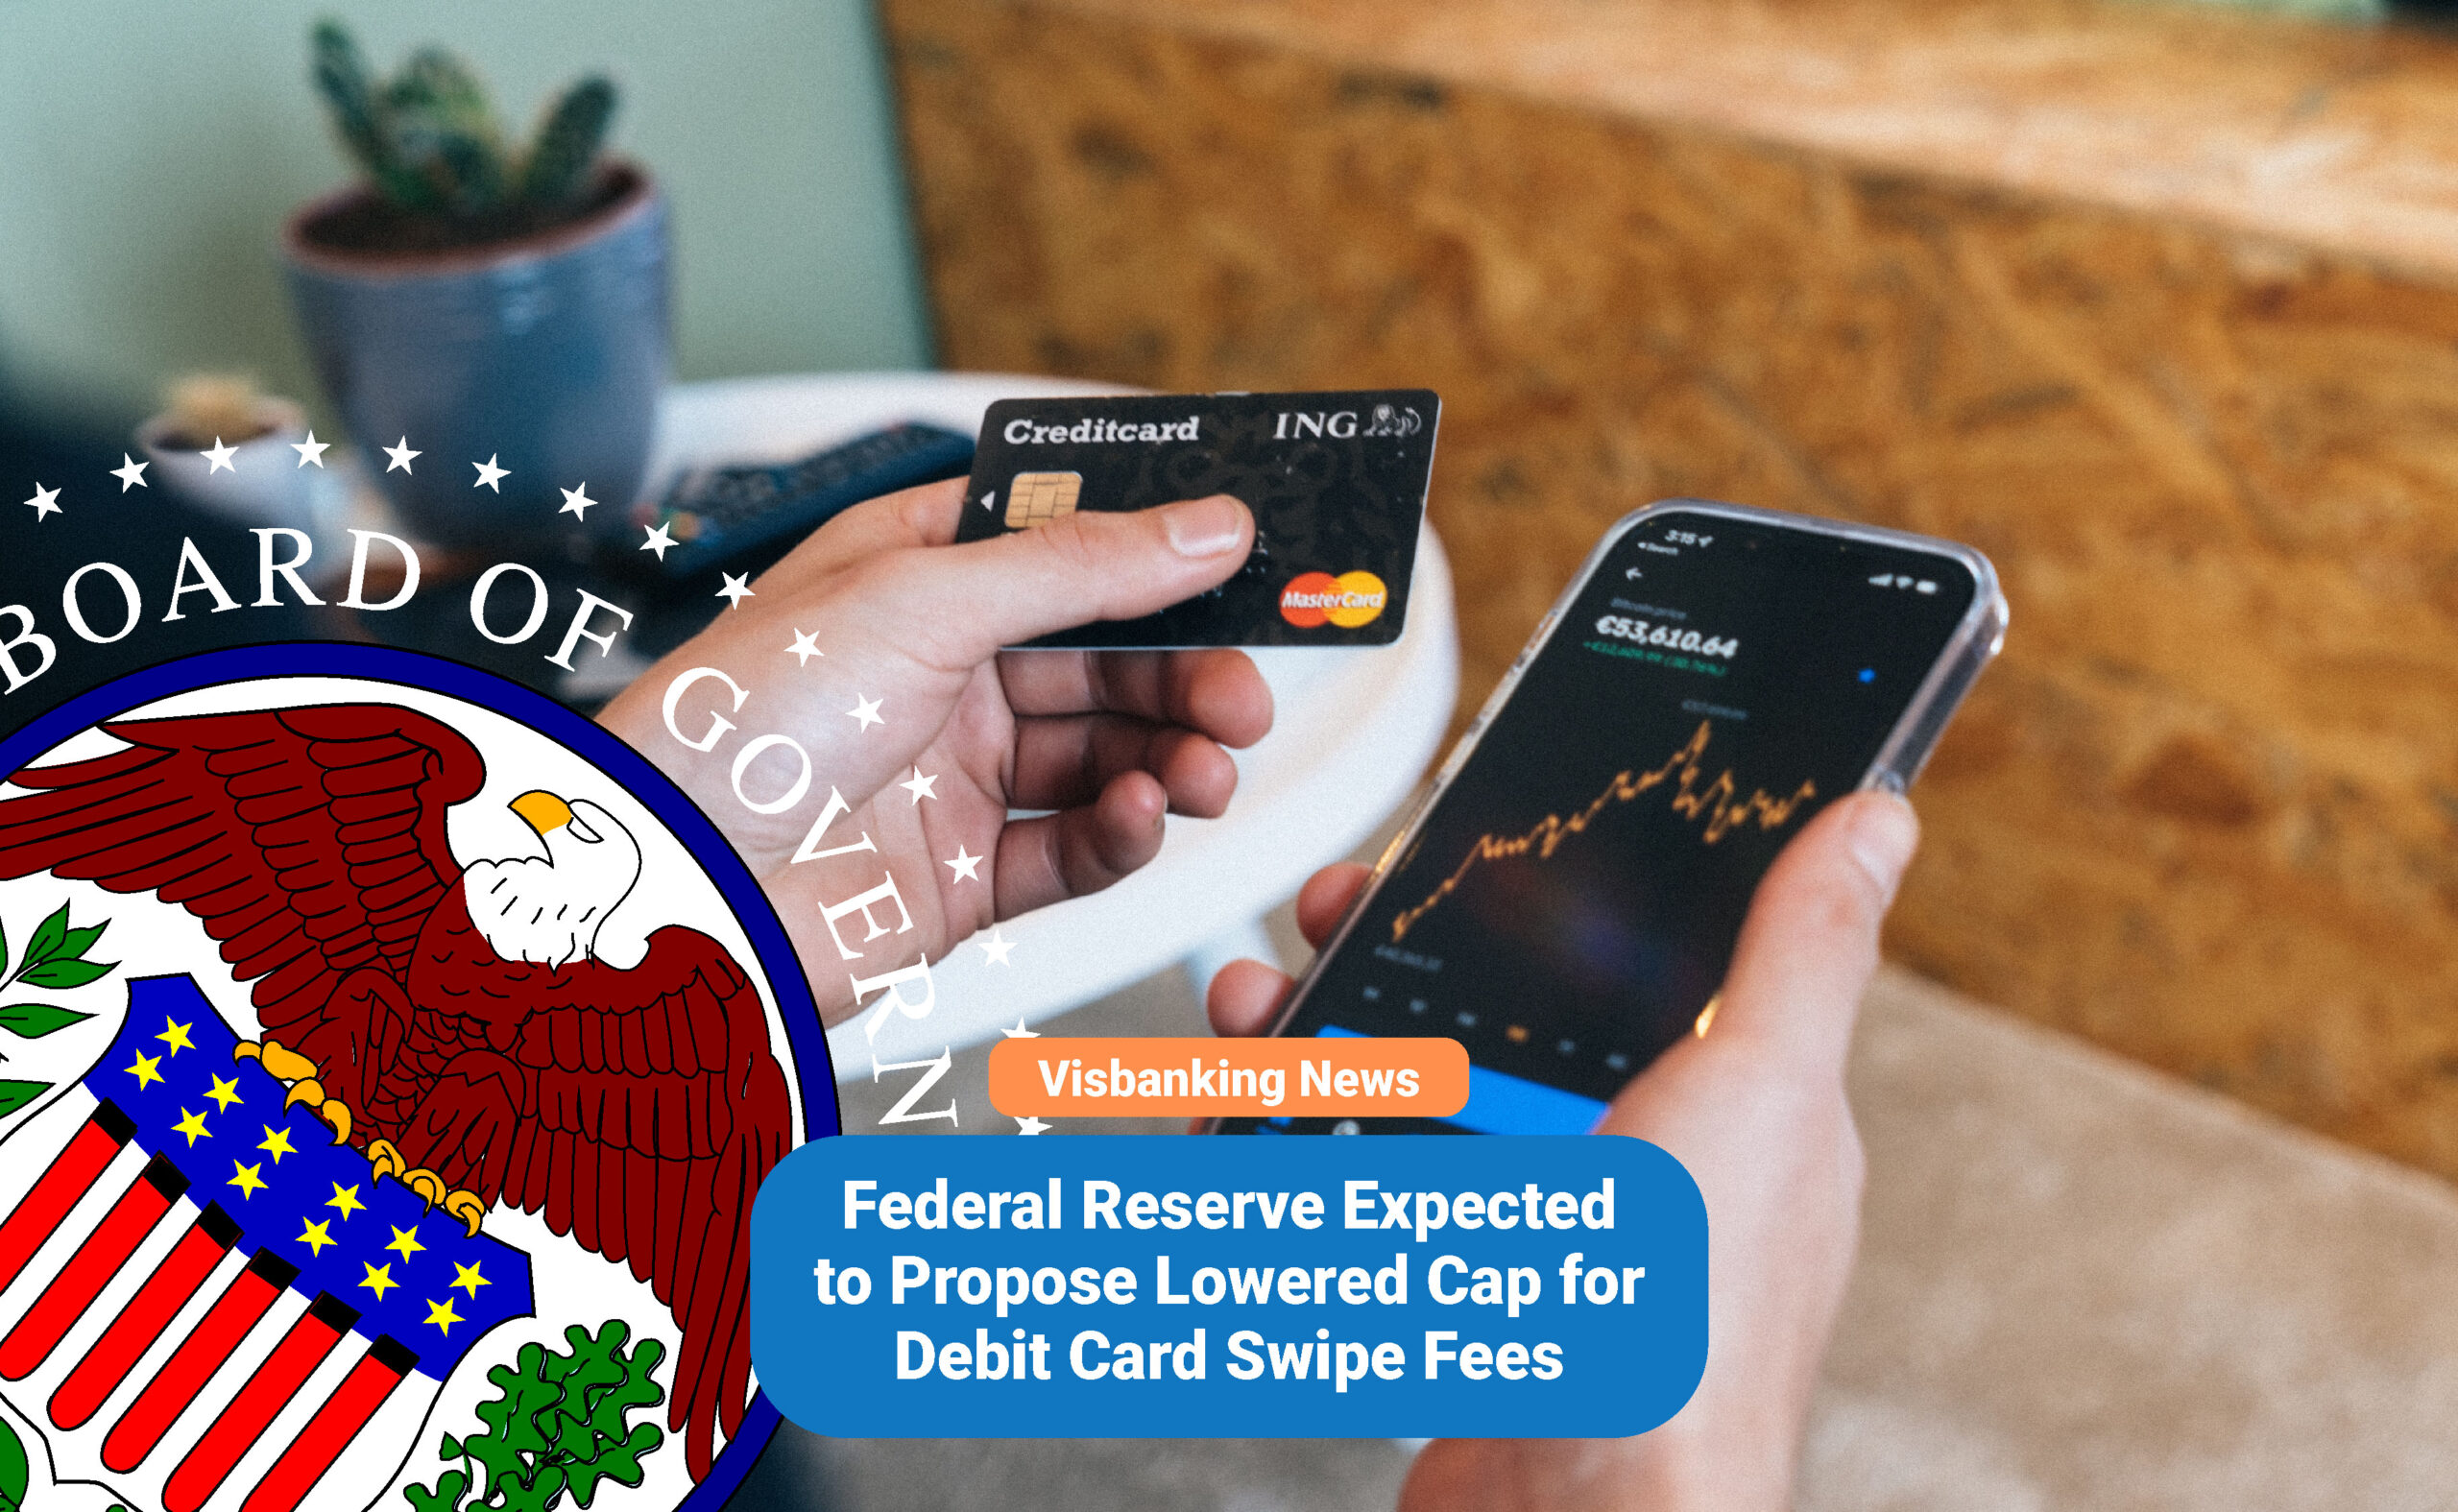 Federal Reserve Expected to Propose Lowered Cap for Debit Card Swipe Fees